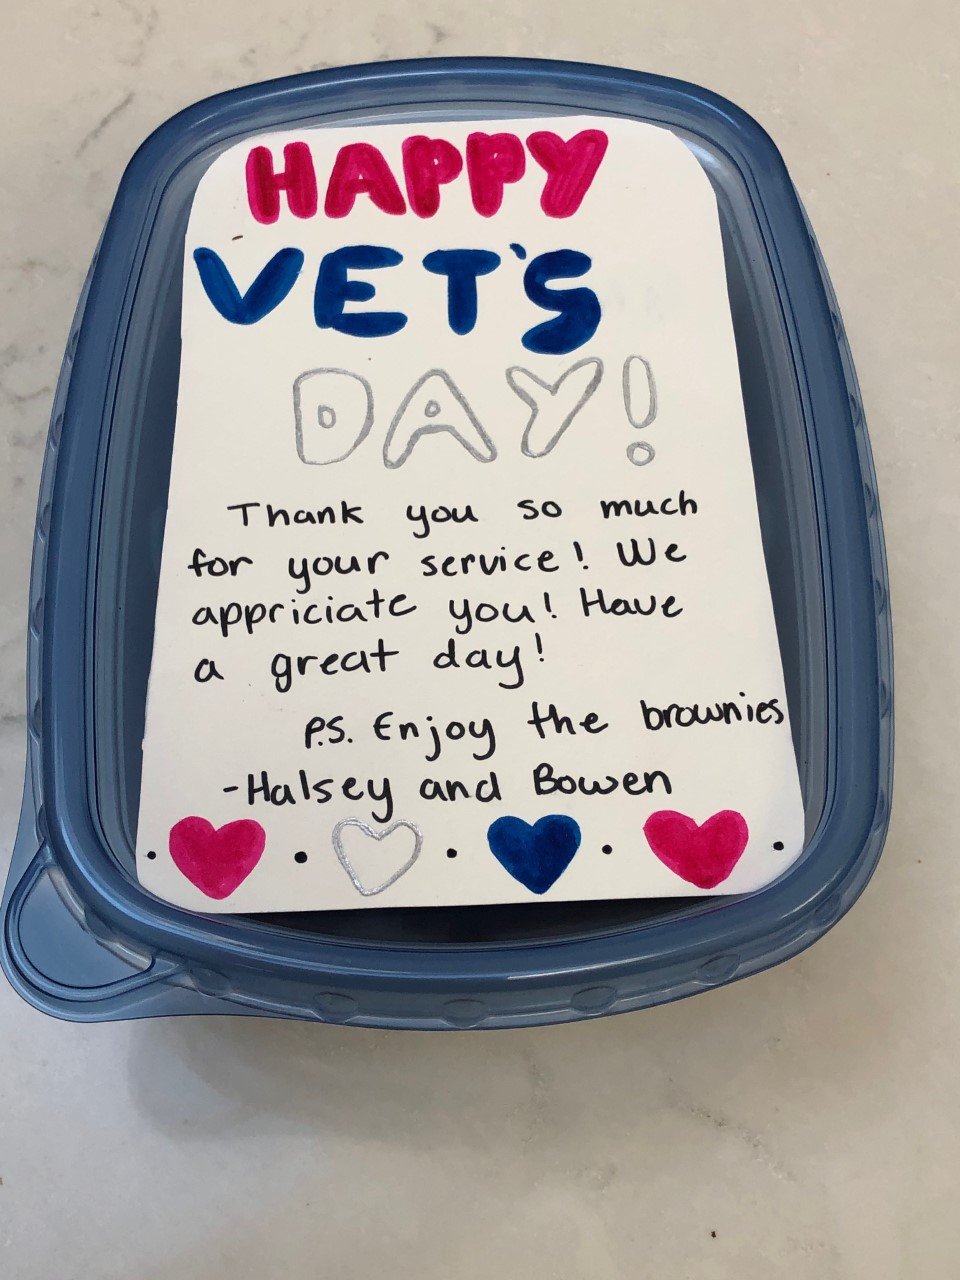 "I cannot express how thoughtful, and kind, this gesture is. Truly warms my heart." — Chris Isleib, on receiving a special treat on Veterans Day